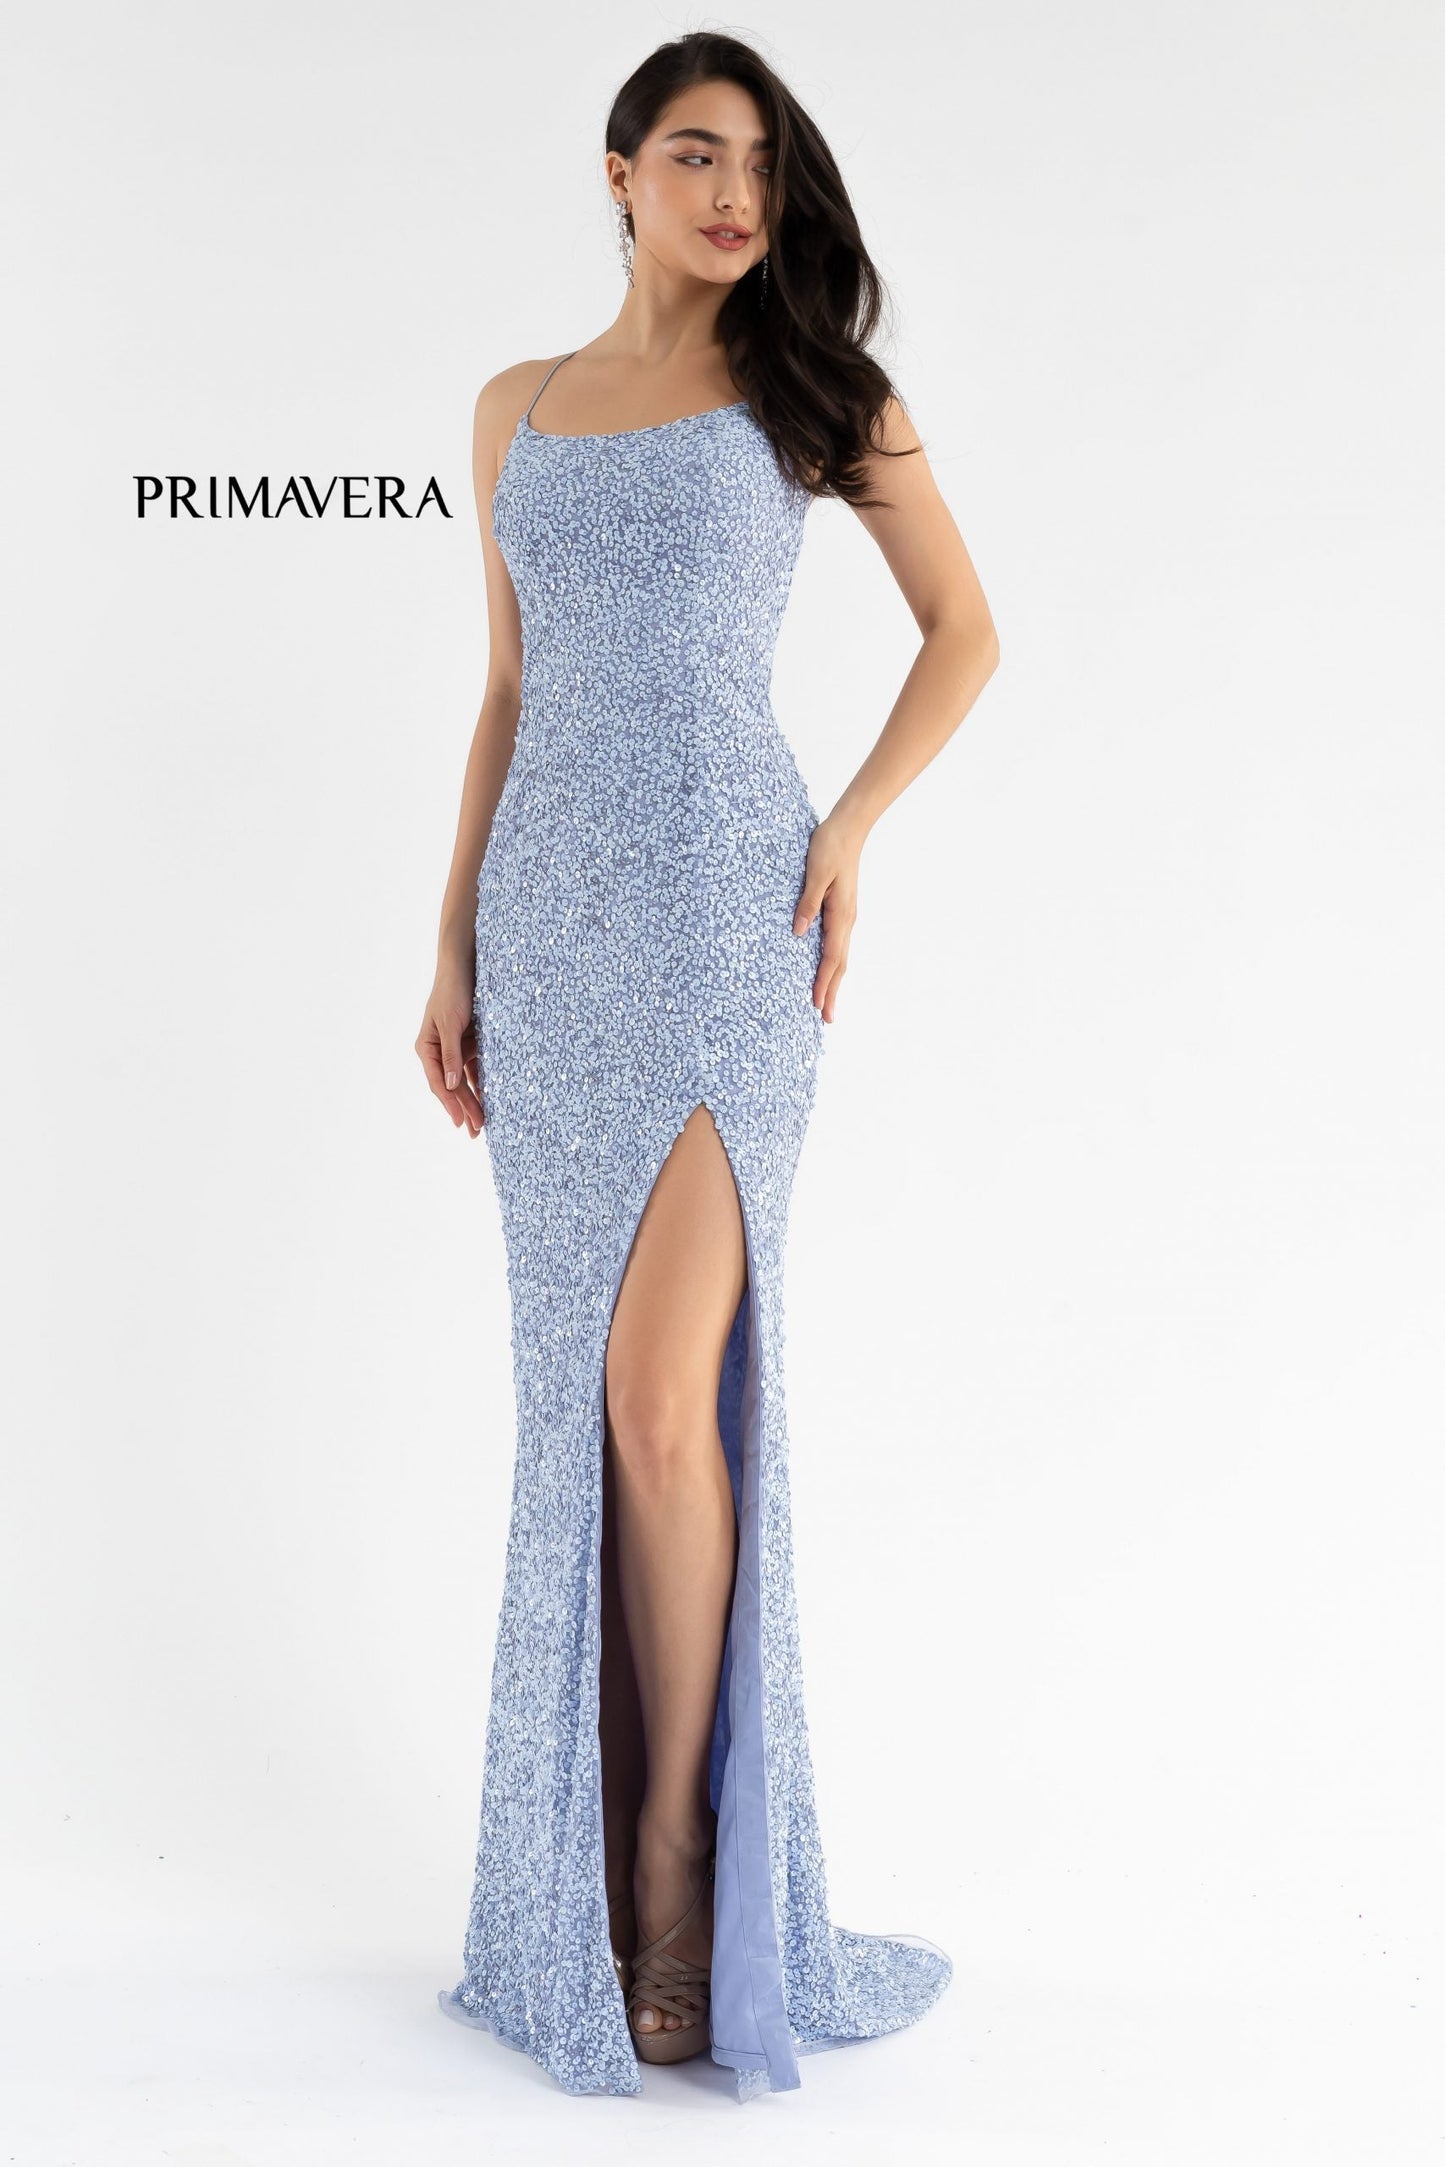 Primavera Couture 3290 This prom dress adds a pop to the multi sequins dress.  With a scoop neckline and spaghetti straps that cross and tie in the back.  This long evening dress has a side slit. And need I say, NEON!  Available Colors: Midnight, Emerald, Turquoise, Plum, Peach, Blue, Black, Fuchsia, Cream, Neon Sage, Neon Coral, Neon Lilac, Bright Blue, Rose, Neon Pink, Orange, Baby Pink, Purple, Royal Blue, Ivory, Gold, Charcoal, Red, Apple Green, Forrest Green, Yellow, Mint  Available sizes:  18, 20, 22